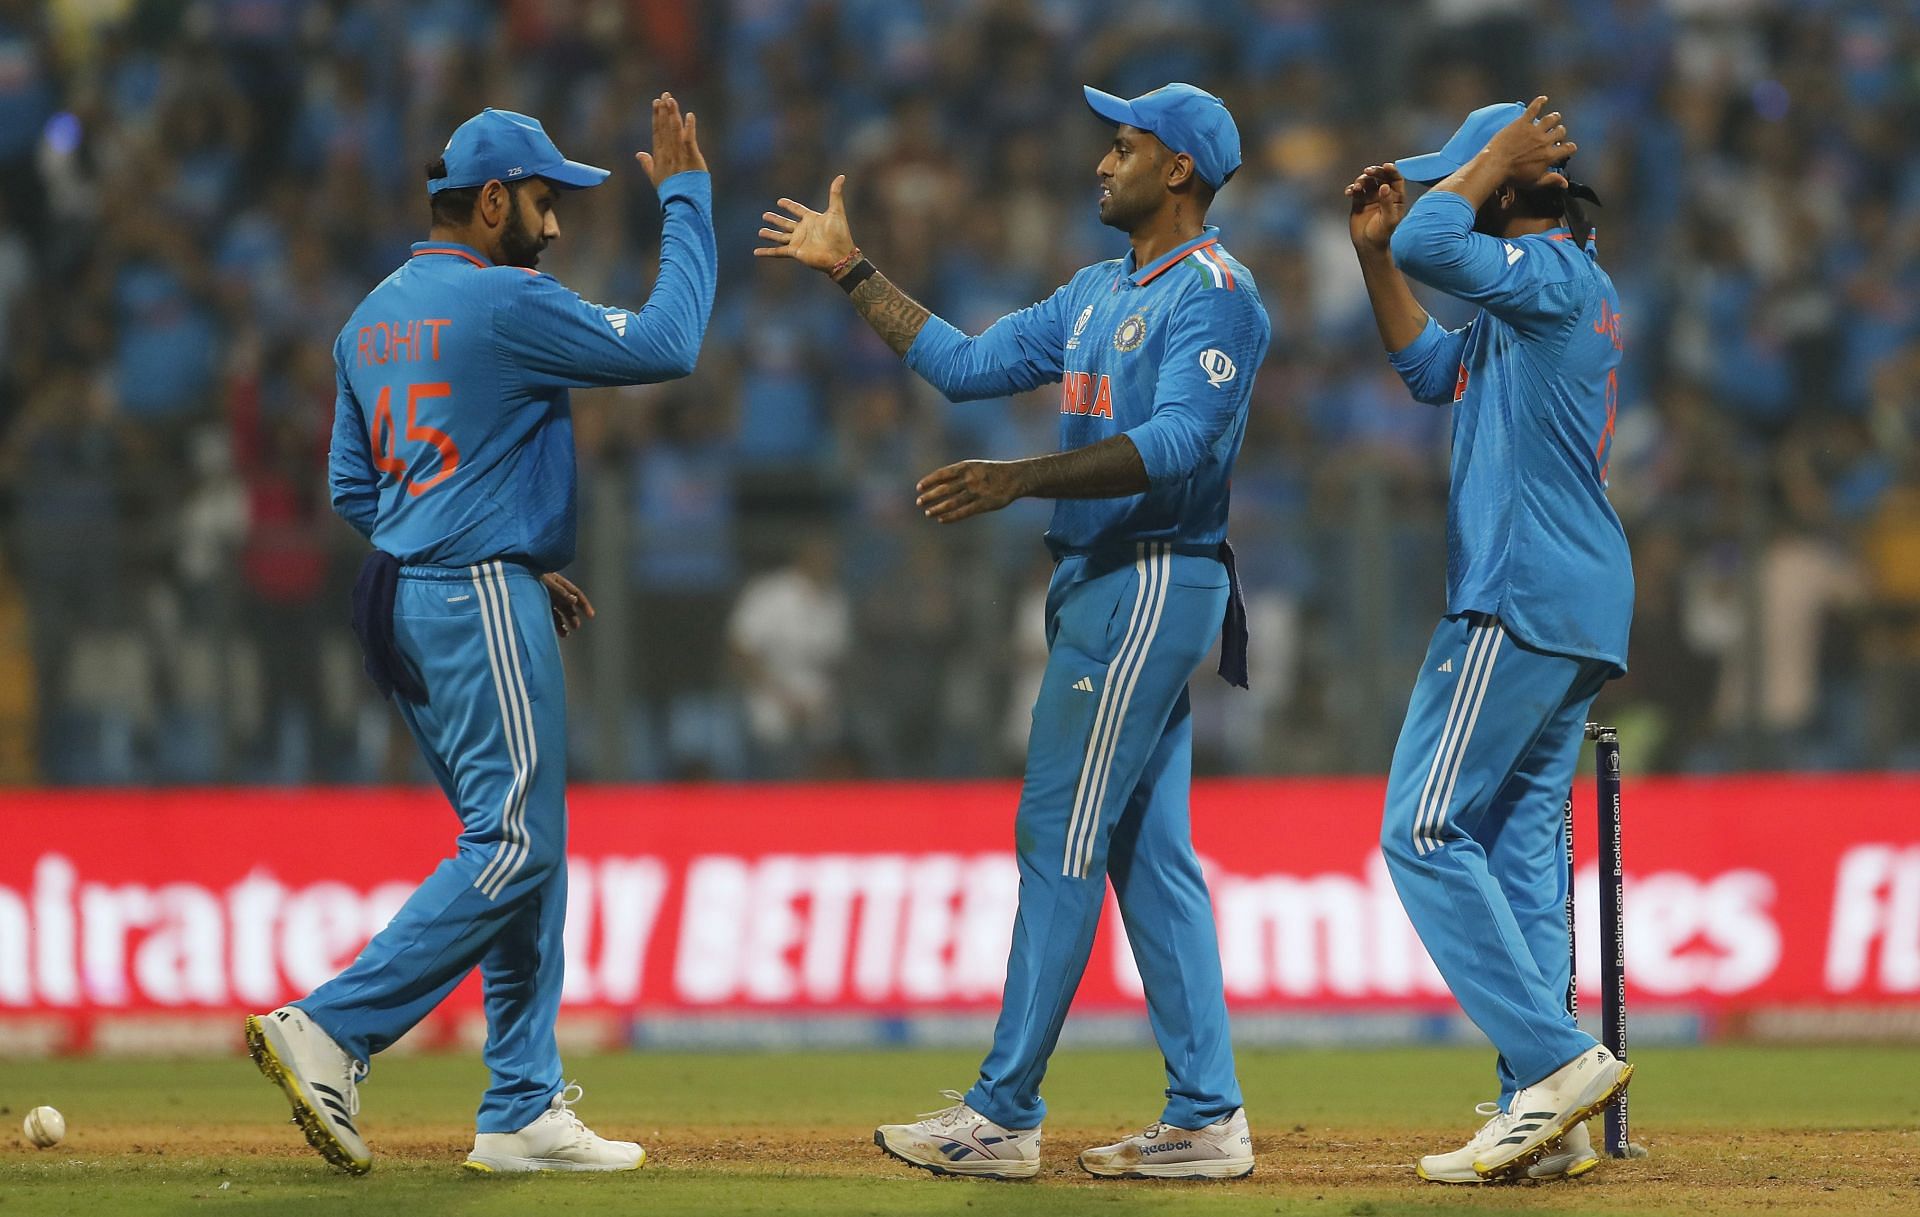 Indian players celebrate a wicket. (Pic: Getty Images)